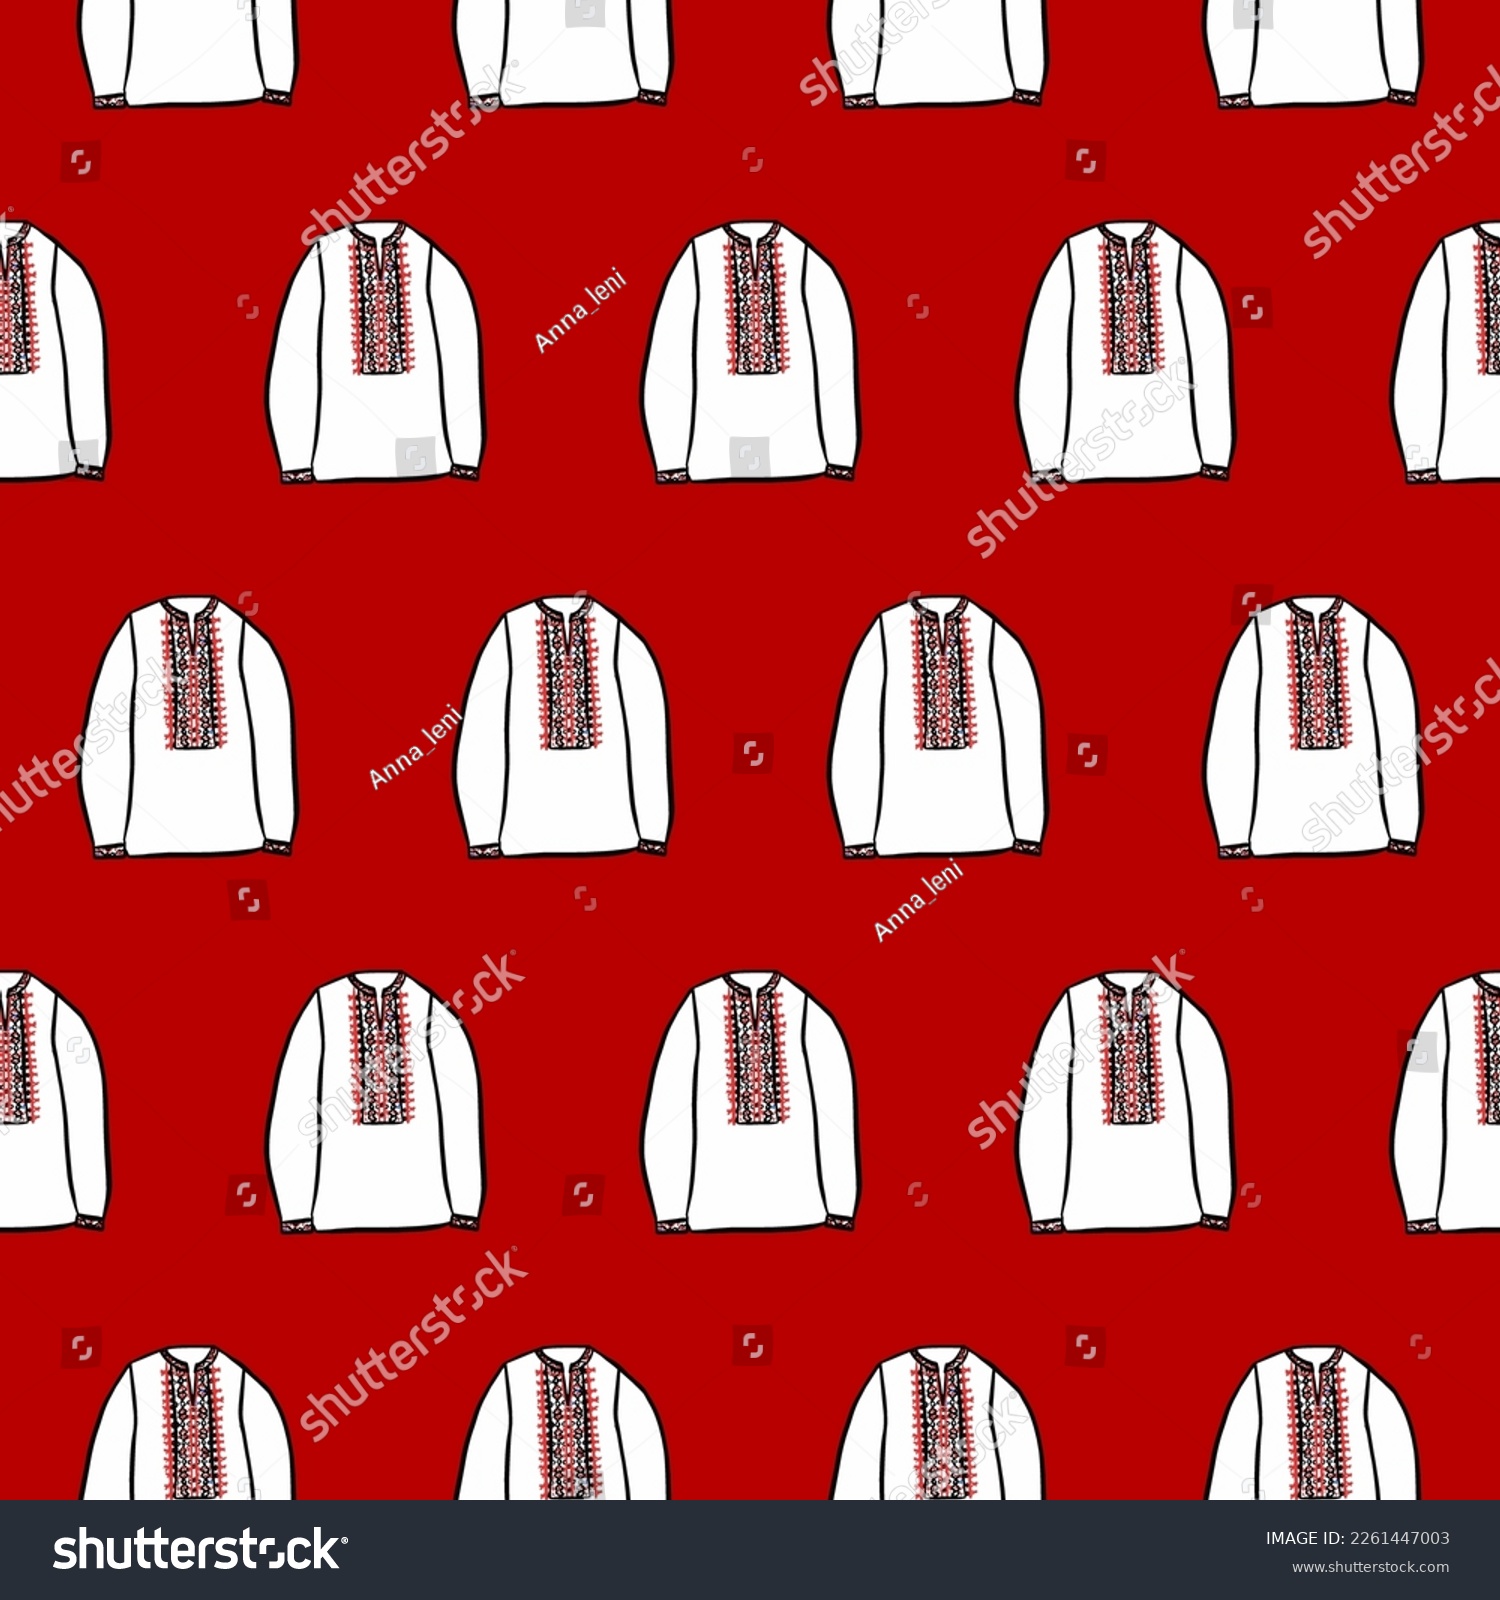 SVG of Ukraine Embroidery Man Shirt Seamless Pattern. Vector Illustration of Sketch Doodle Hand drawn Ukrainian Cultural Clothes. svg